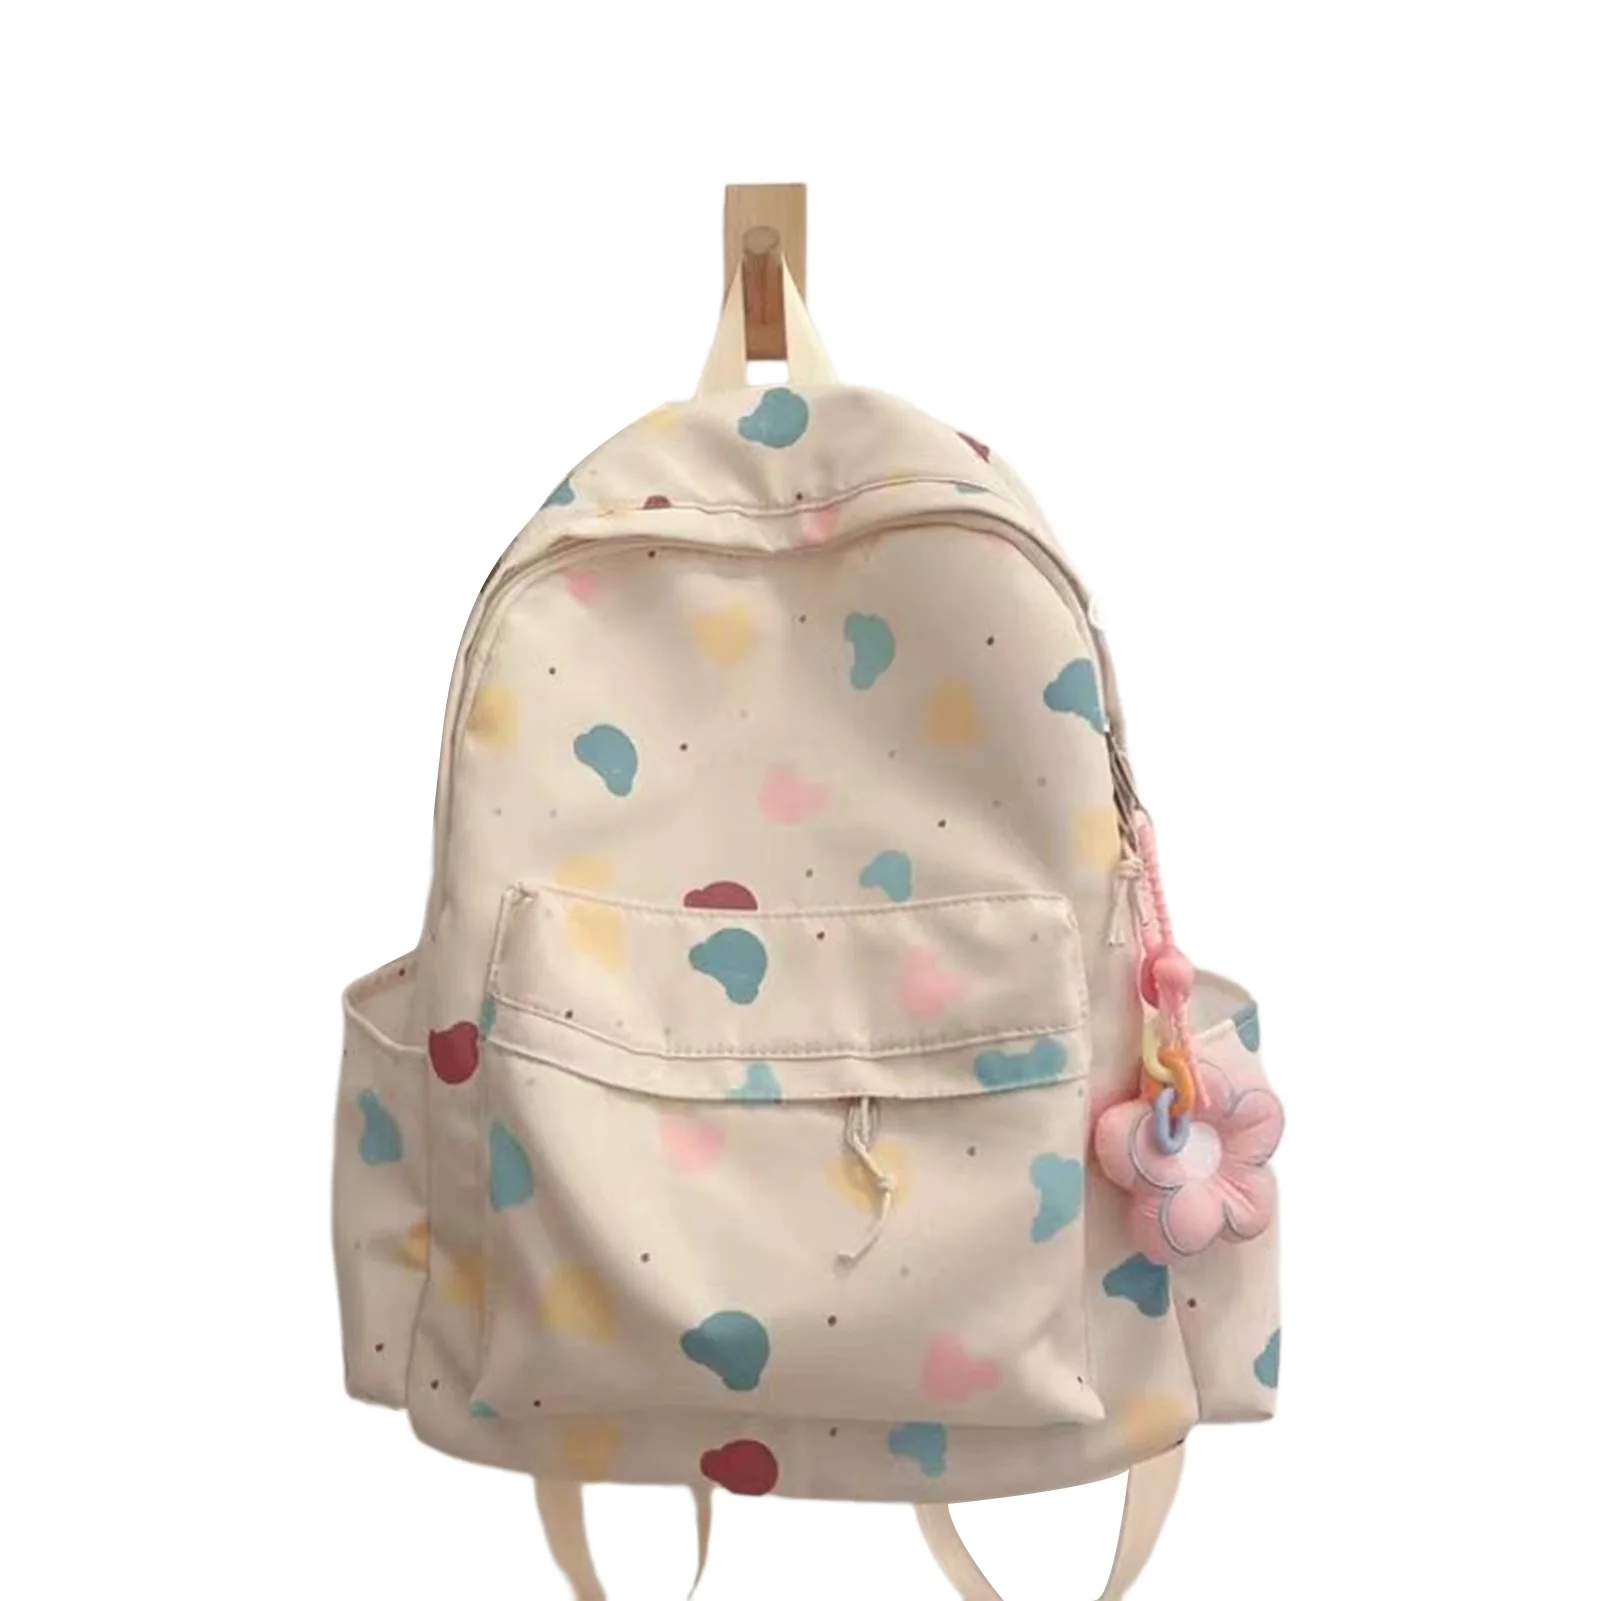 

Waterproof Schoolbag for Girls Large Capacity Flower/Heart/Bear Daypack with Zipper Closure for Primary School Bags Travel Back